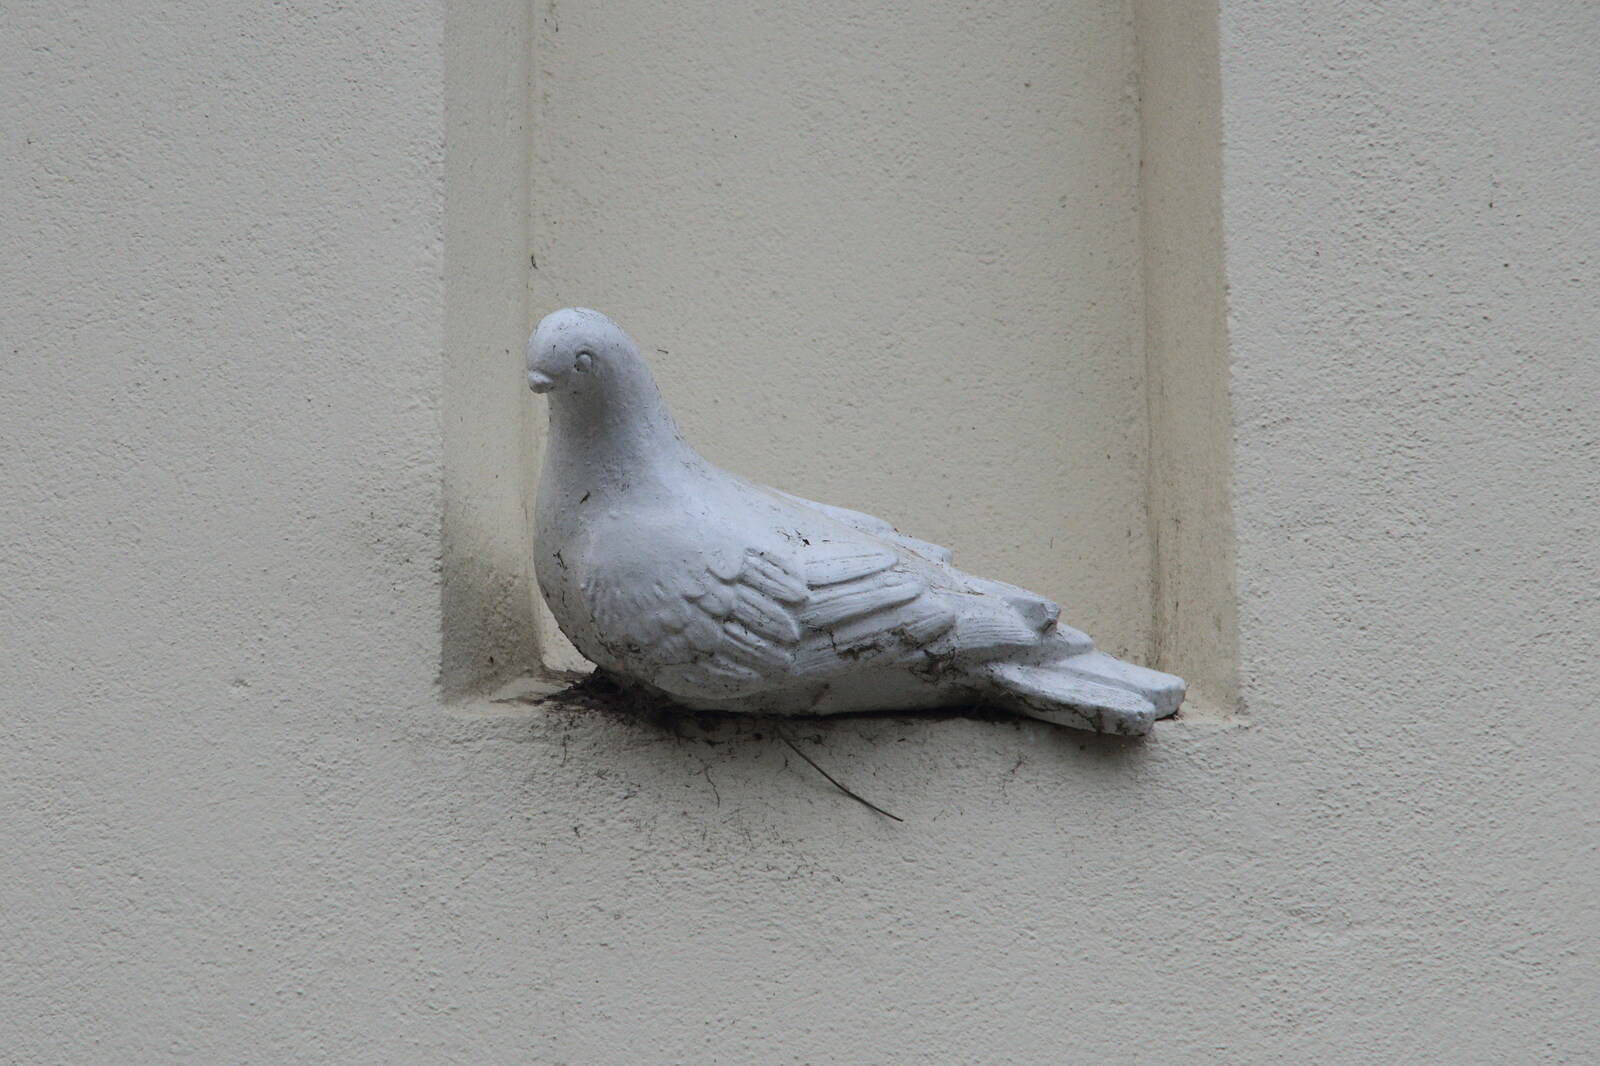 Winter Walks around Brome and Hoxne, Suffolk - 2nd January 2023: There's a stone pigeon in an alcove